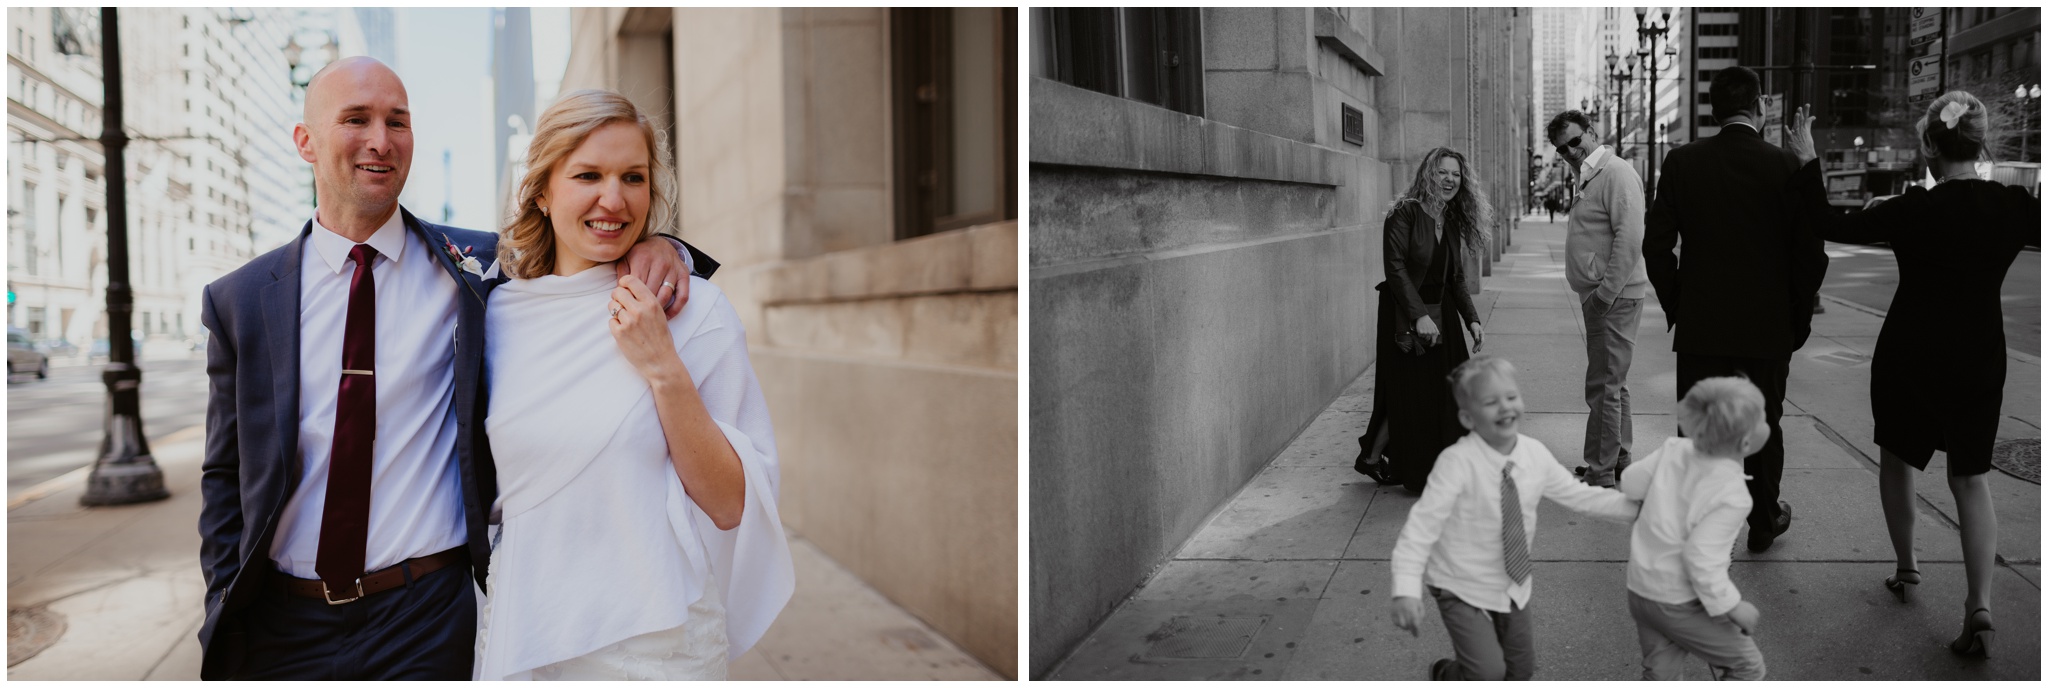 The Morros Chicago Wedding Photography Olga and Jeff Downtown Chicago City Hall Elopement_0050.jpg